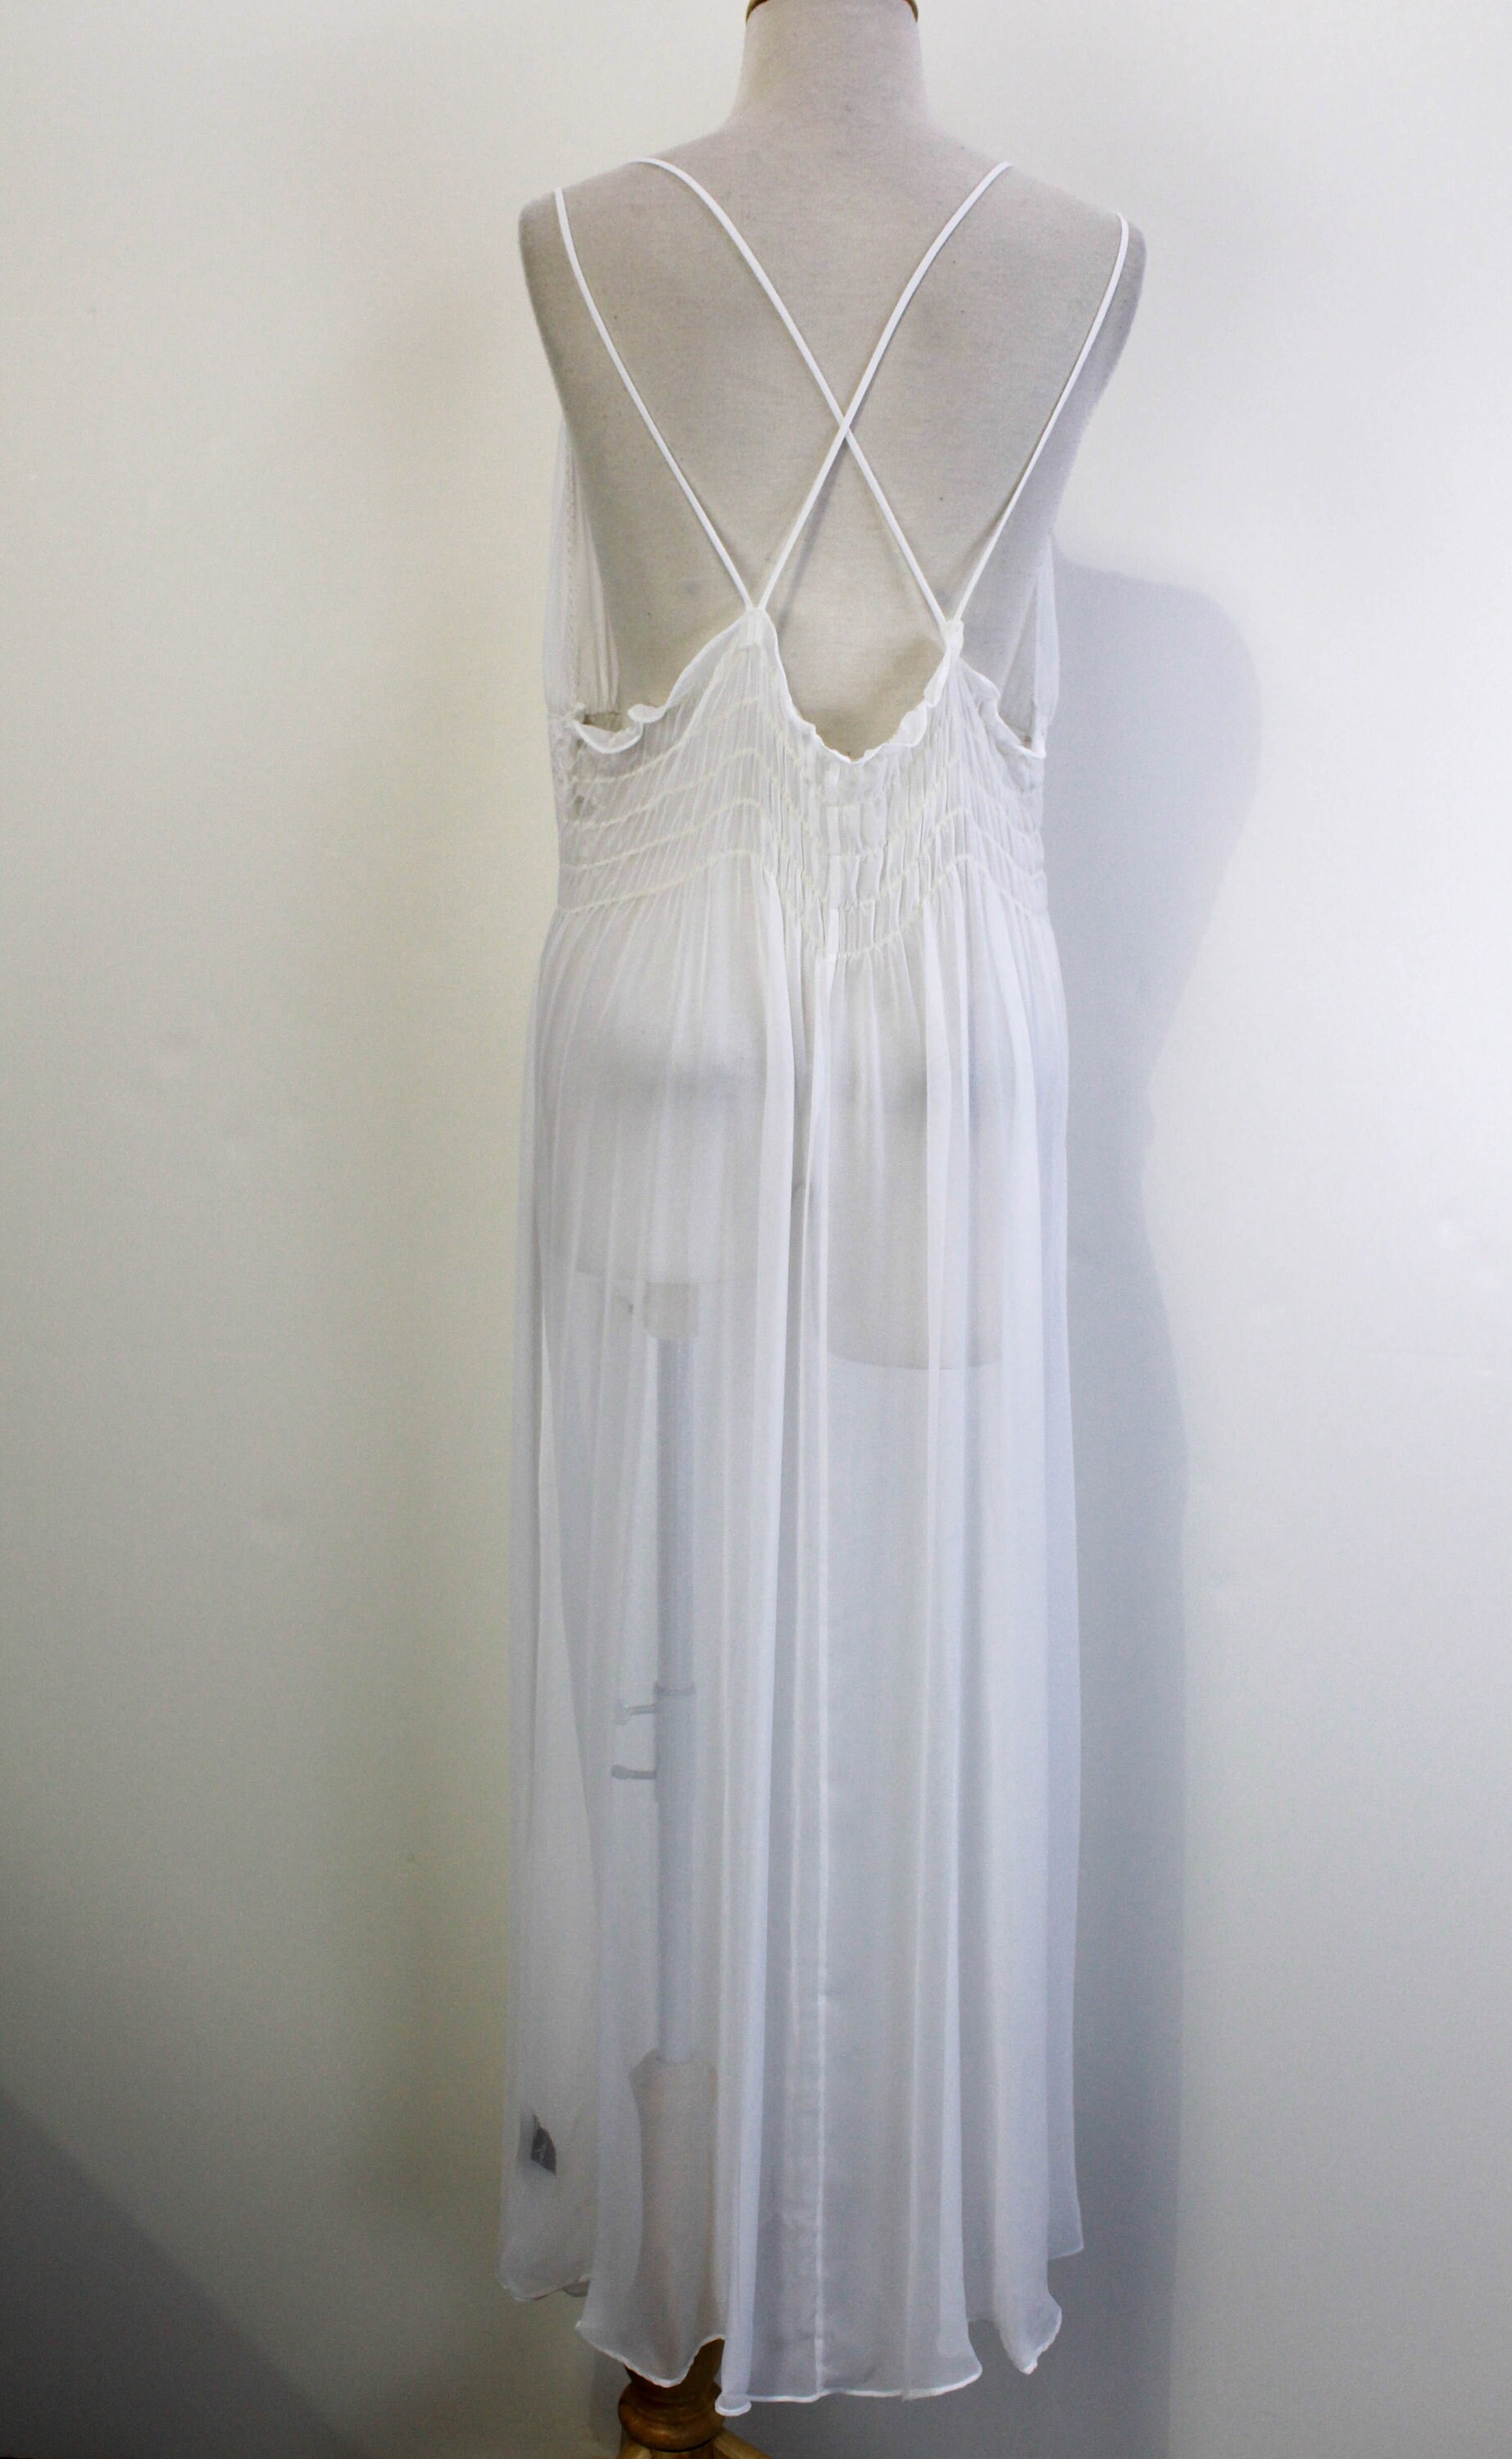 Vintage Lingerie Gown Large White Chiffon and Lace Slip | Etsy